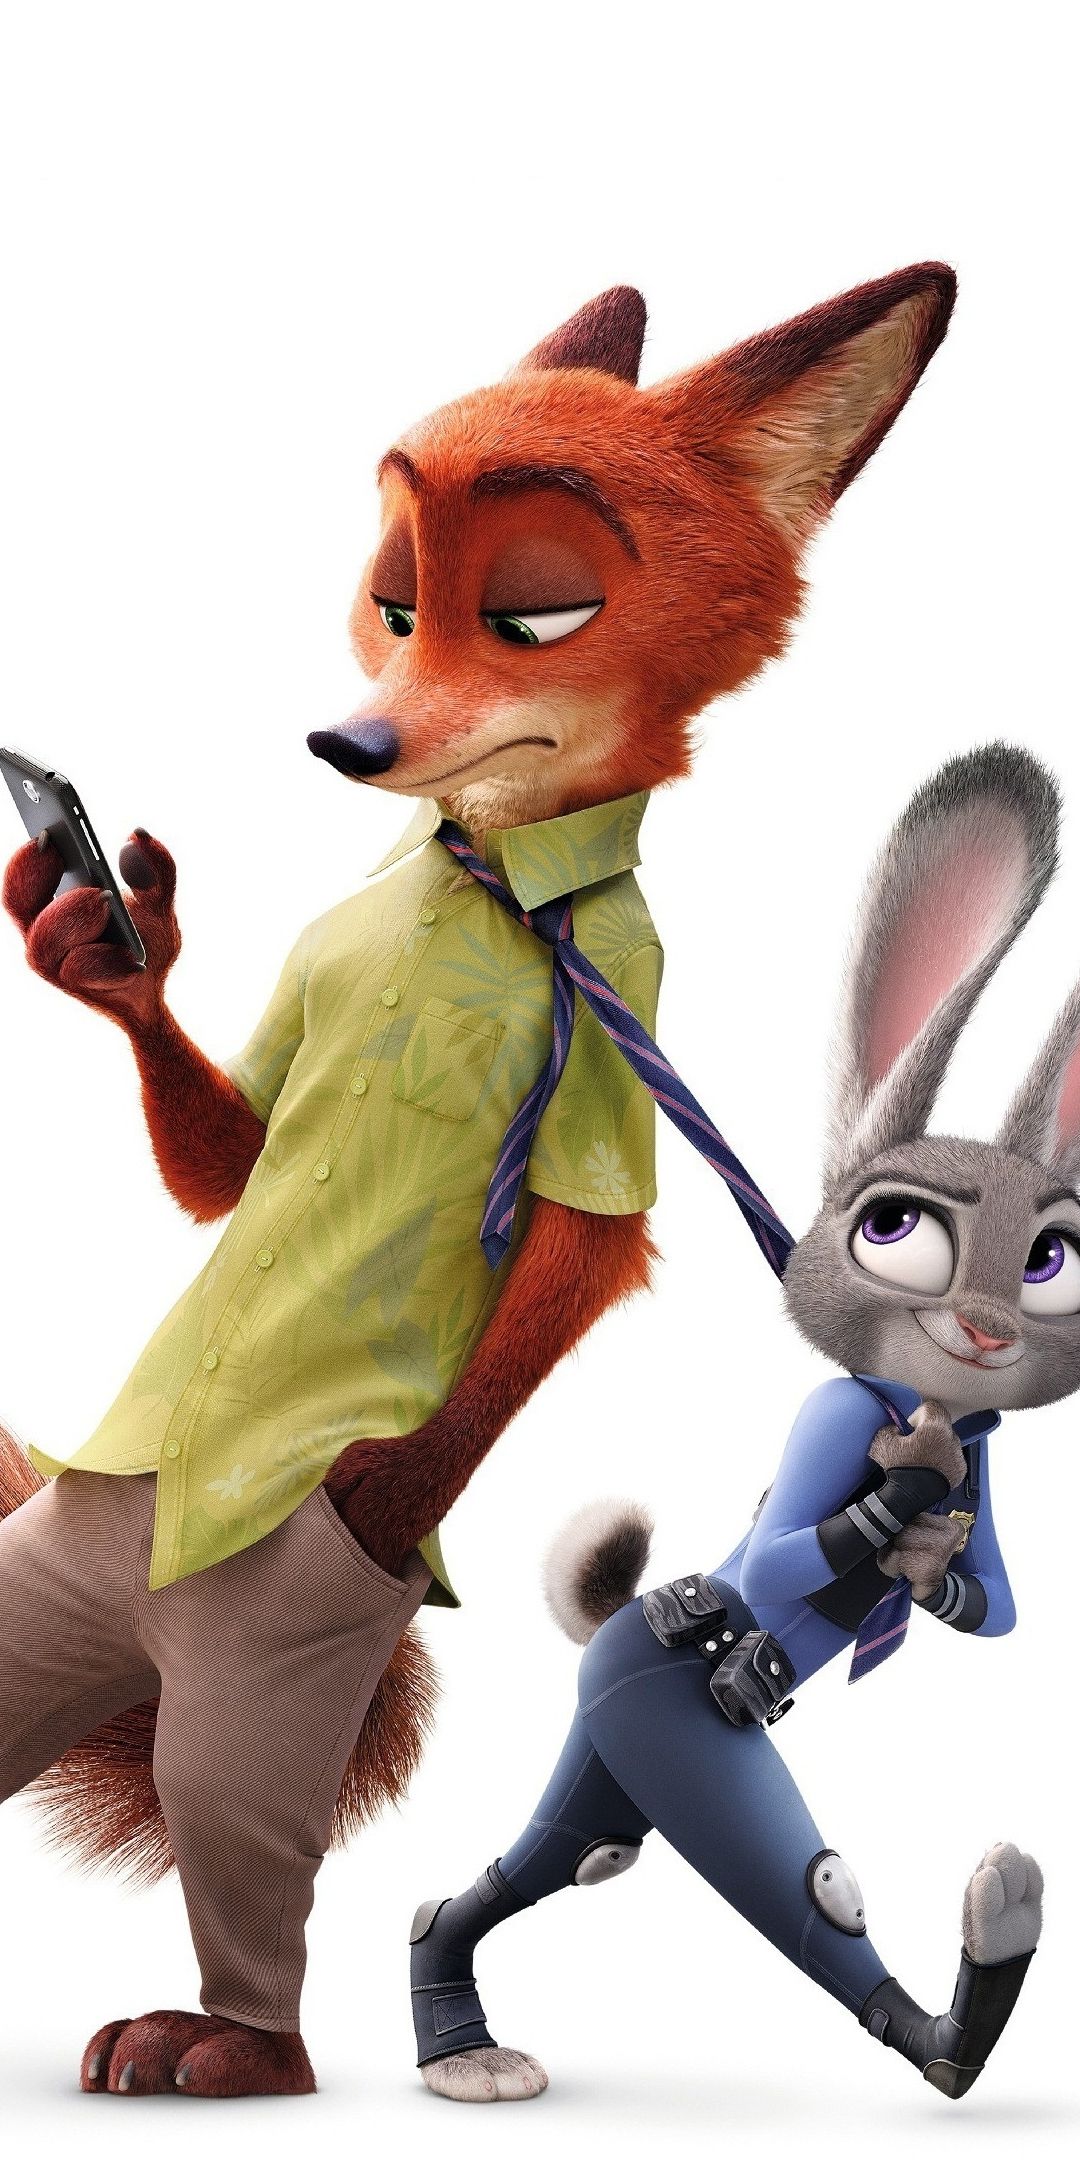 Download 1080x2160 wallpaper zootopia, judy hopps, nick wilde, animation movie, honor 7x, honor 9 lite, honor view HD image, background, 6322